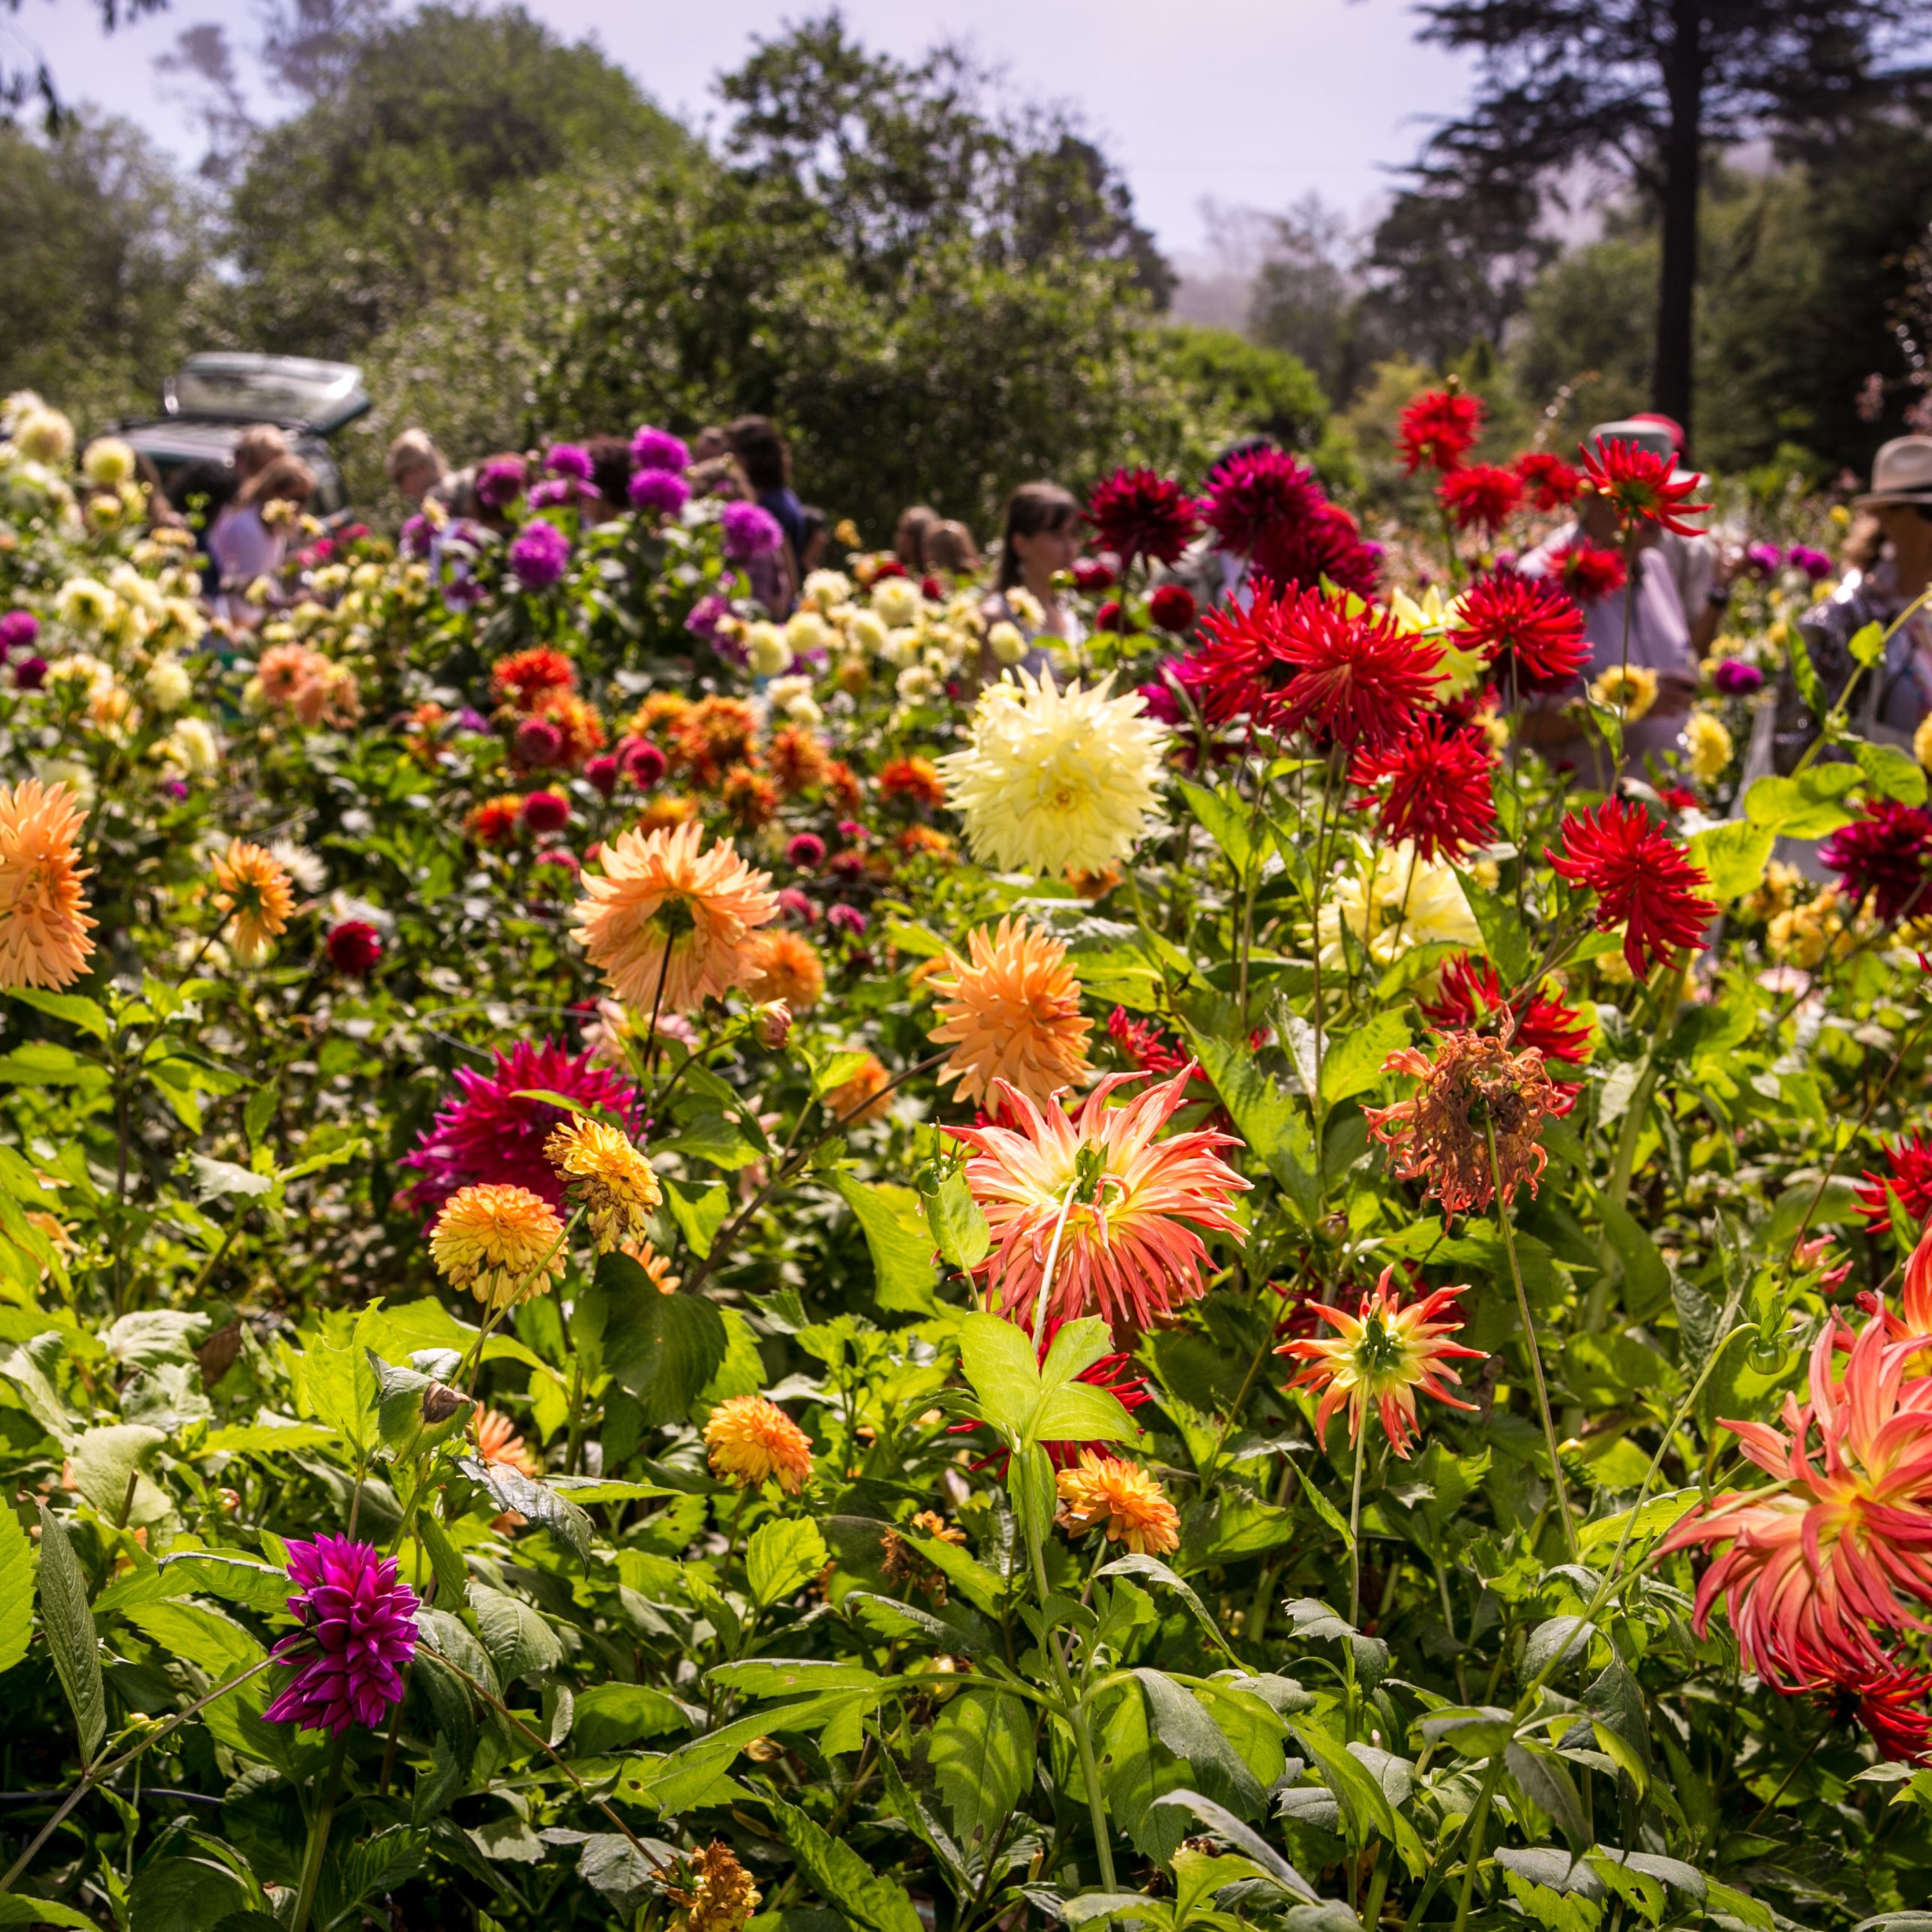  The 10 Magnificent California Gardens Inspiring Us Right Now